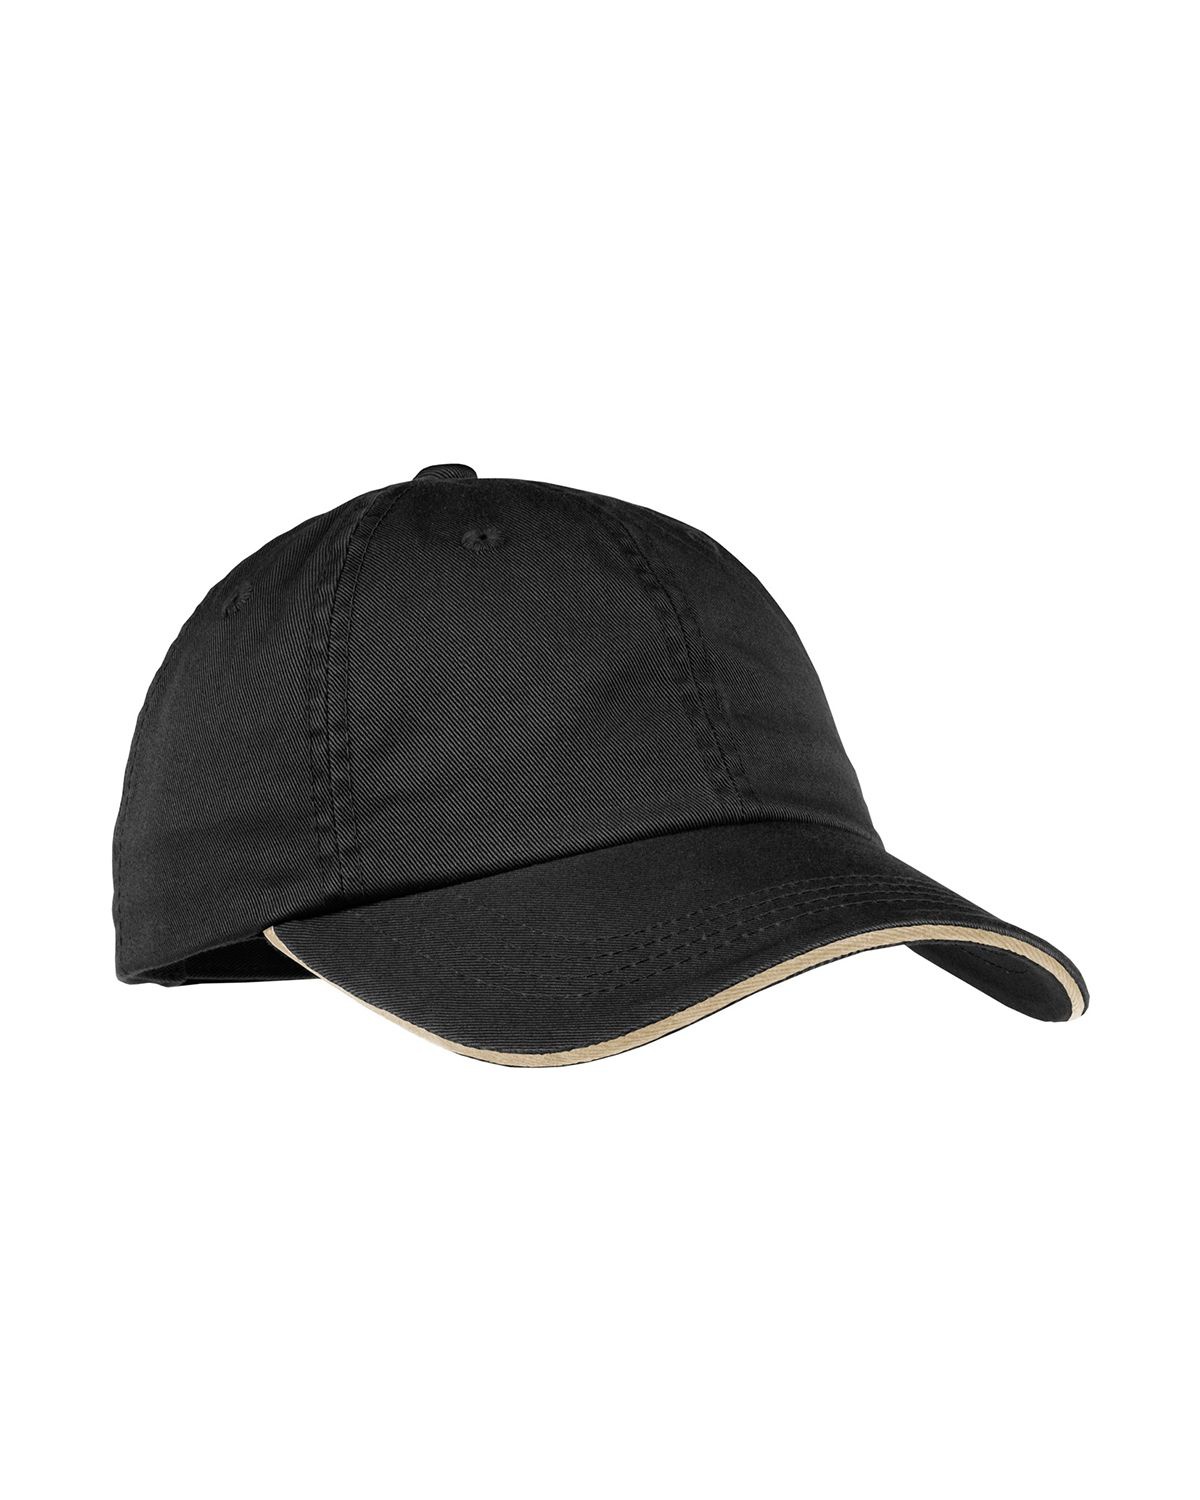 Port Authority LC830 Women Sandwich Bill Cap with Striped Closure at Apparelstation